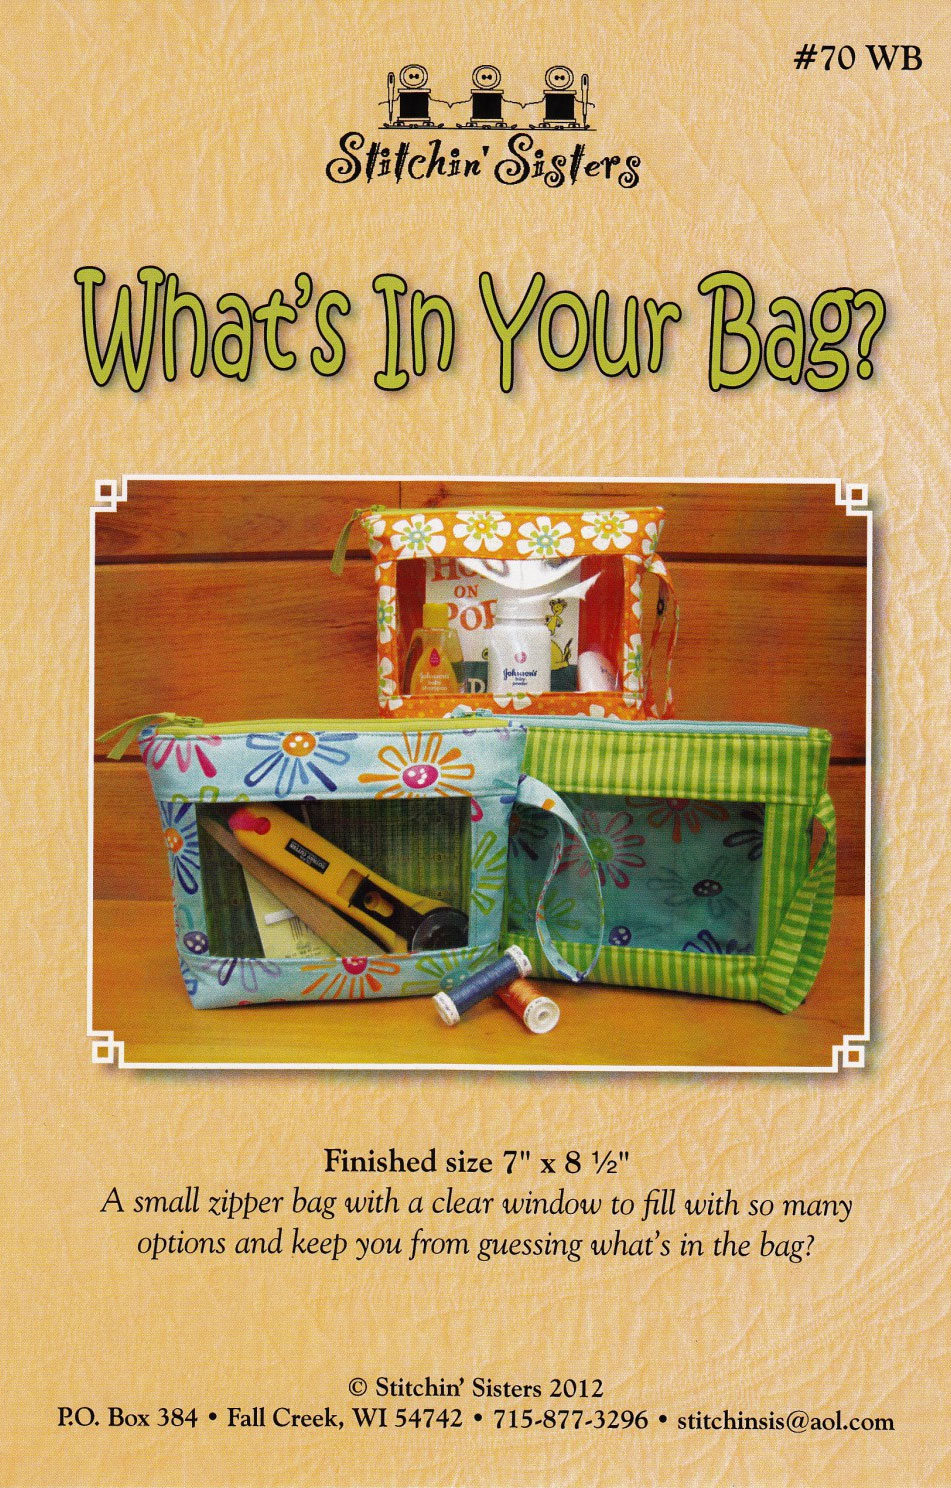 Whats-in-your-bag-sewing-pattern-Stitchin-Sisters-front